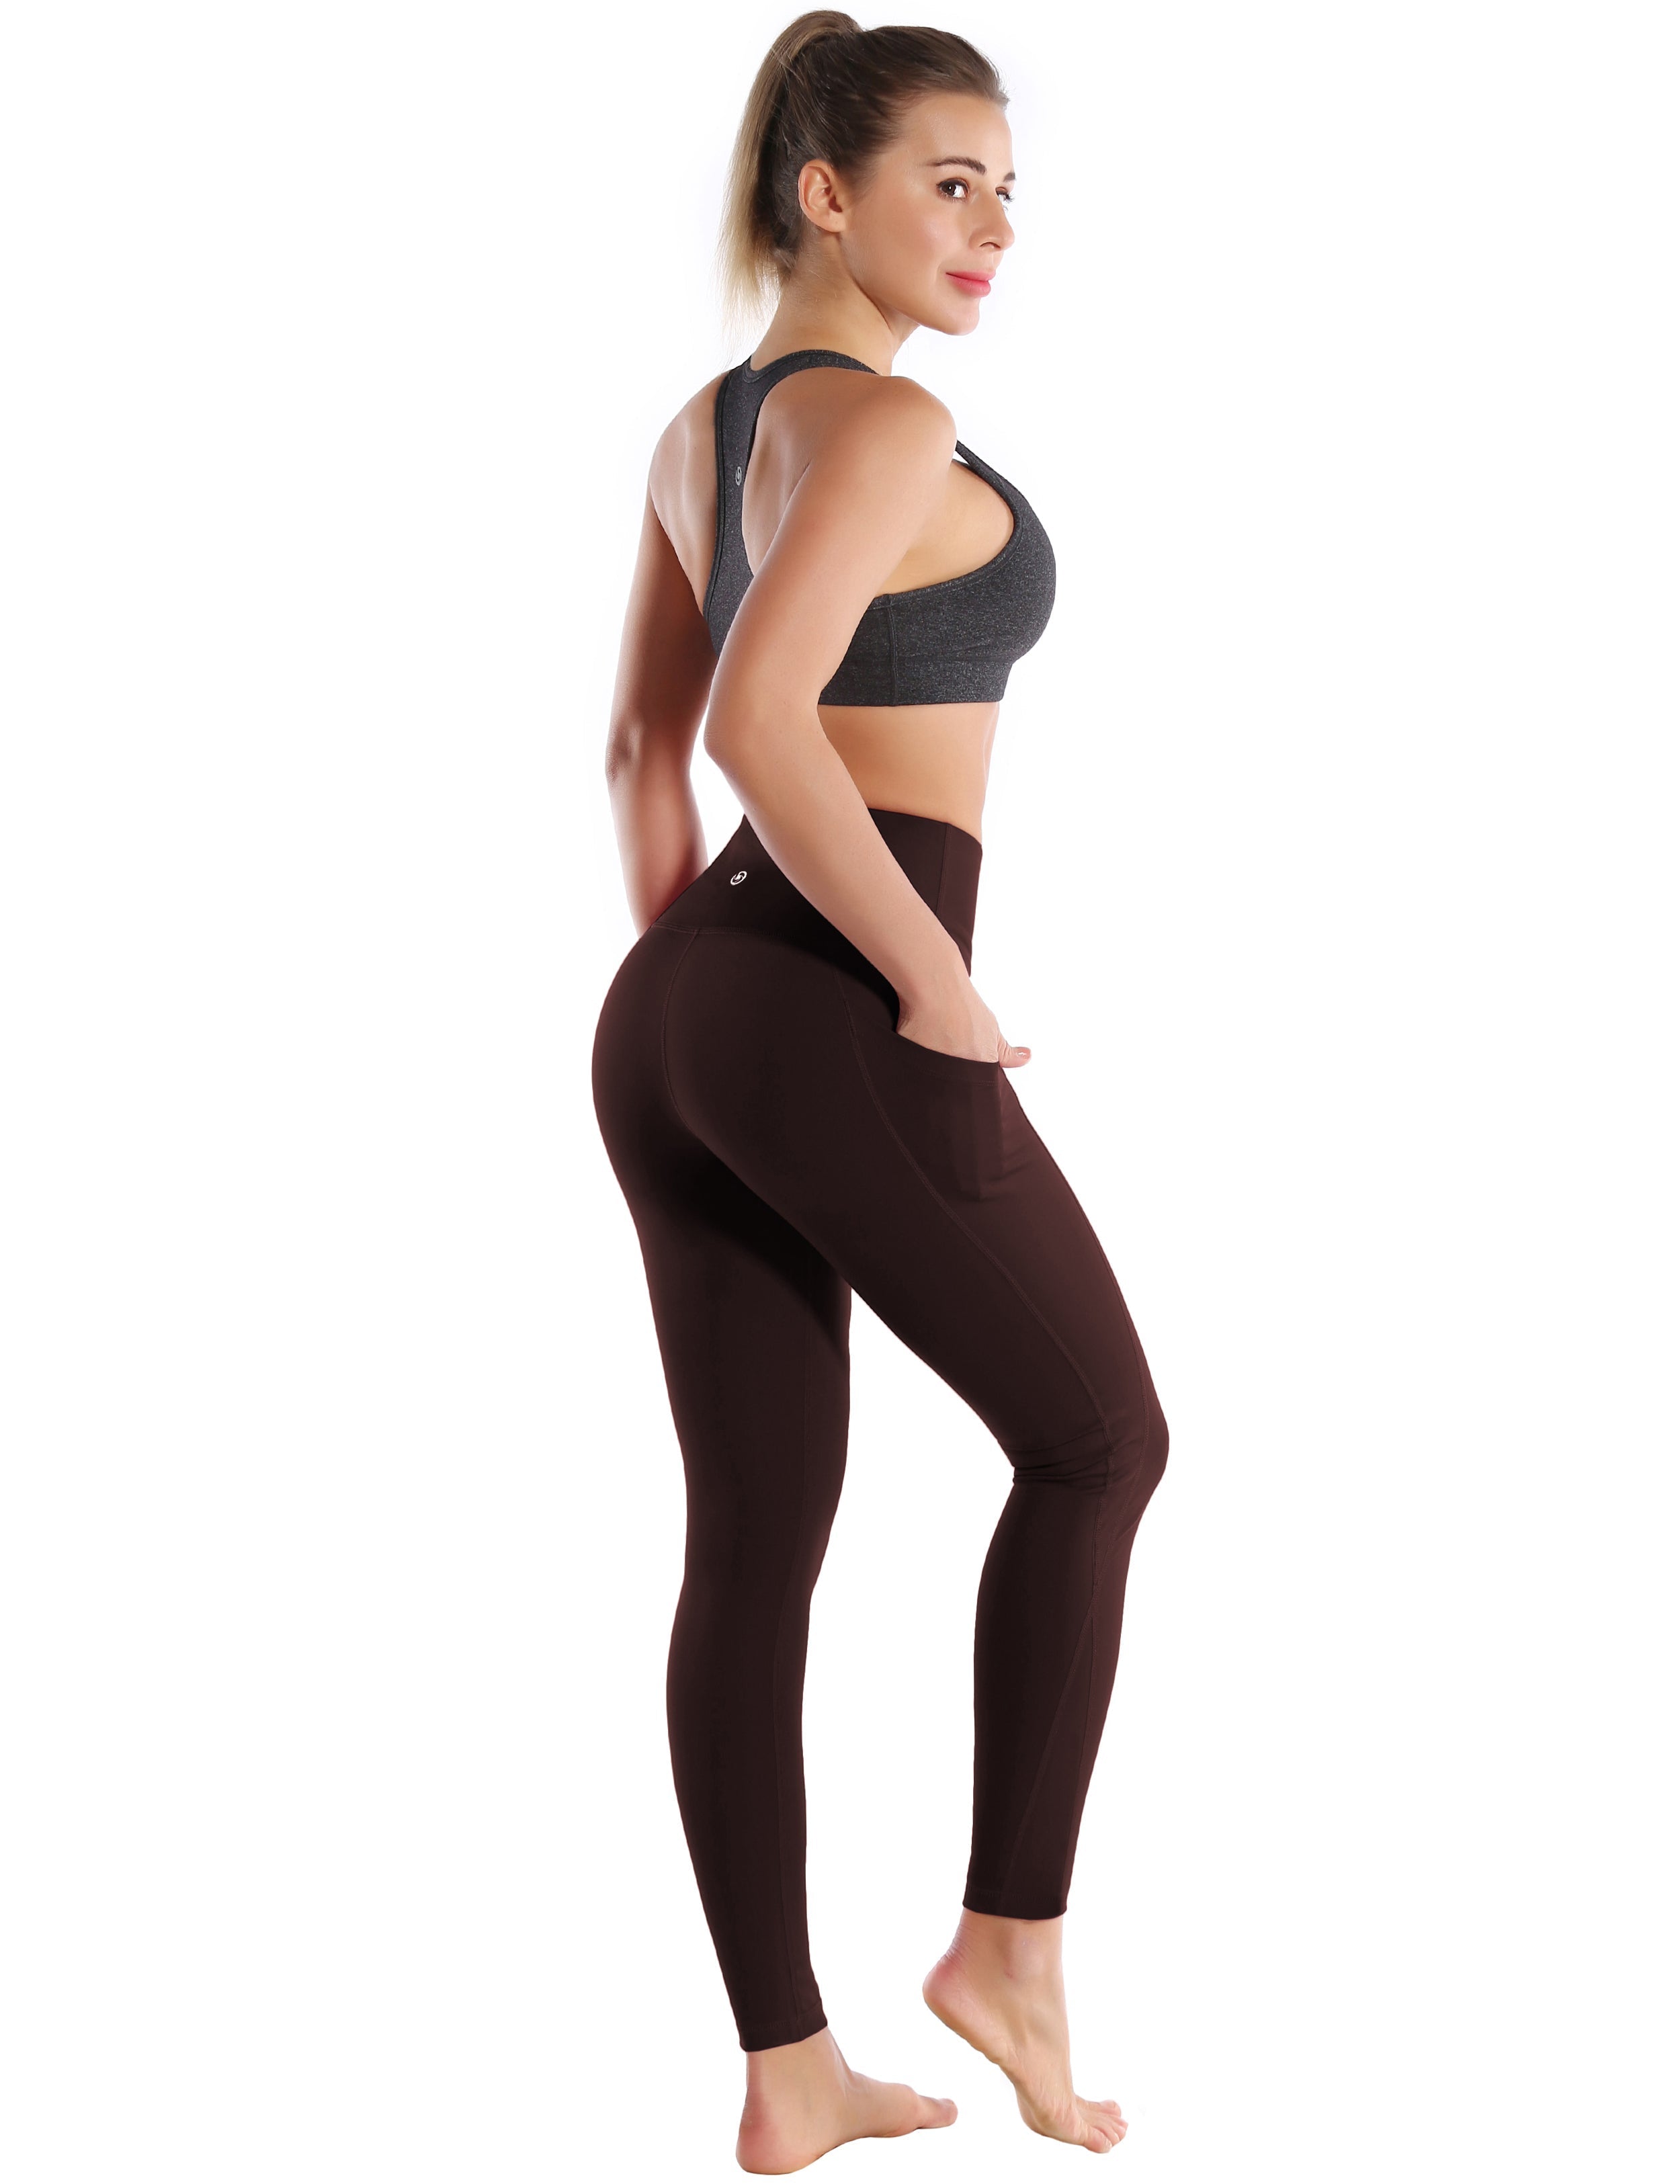 High Waist Side Pockets Plus Size Pants mahoganymaroon 75% Nylon, 25% Spandex Fabric doesn't attract lint easily 4-way stretch No see-through Moisture-wicking Tummy control Inner pocket